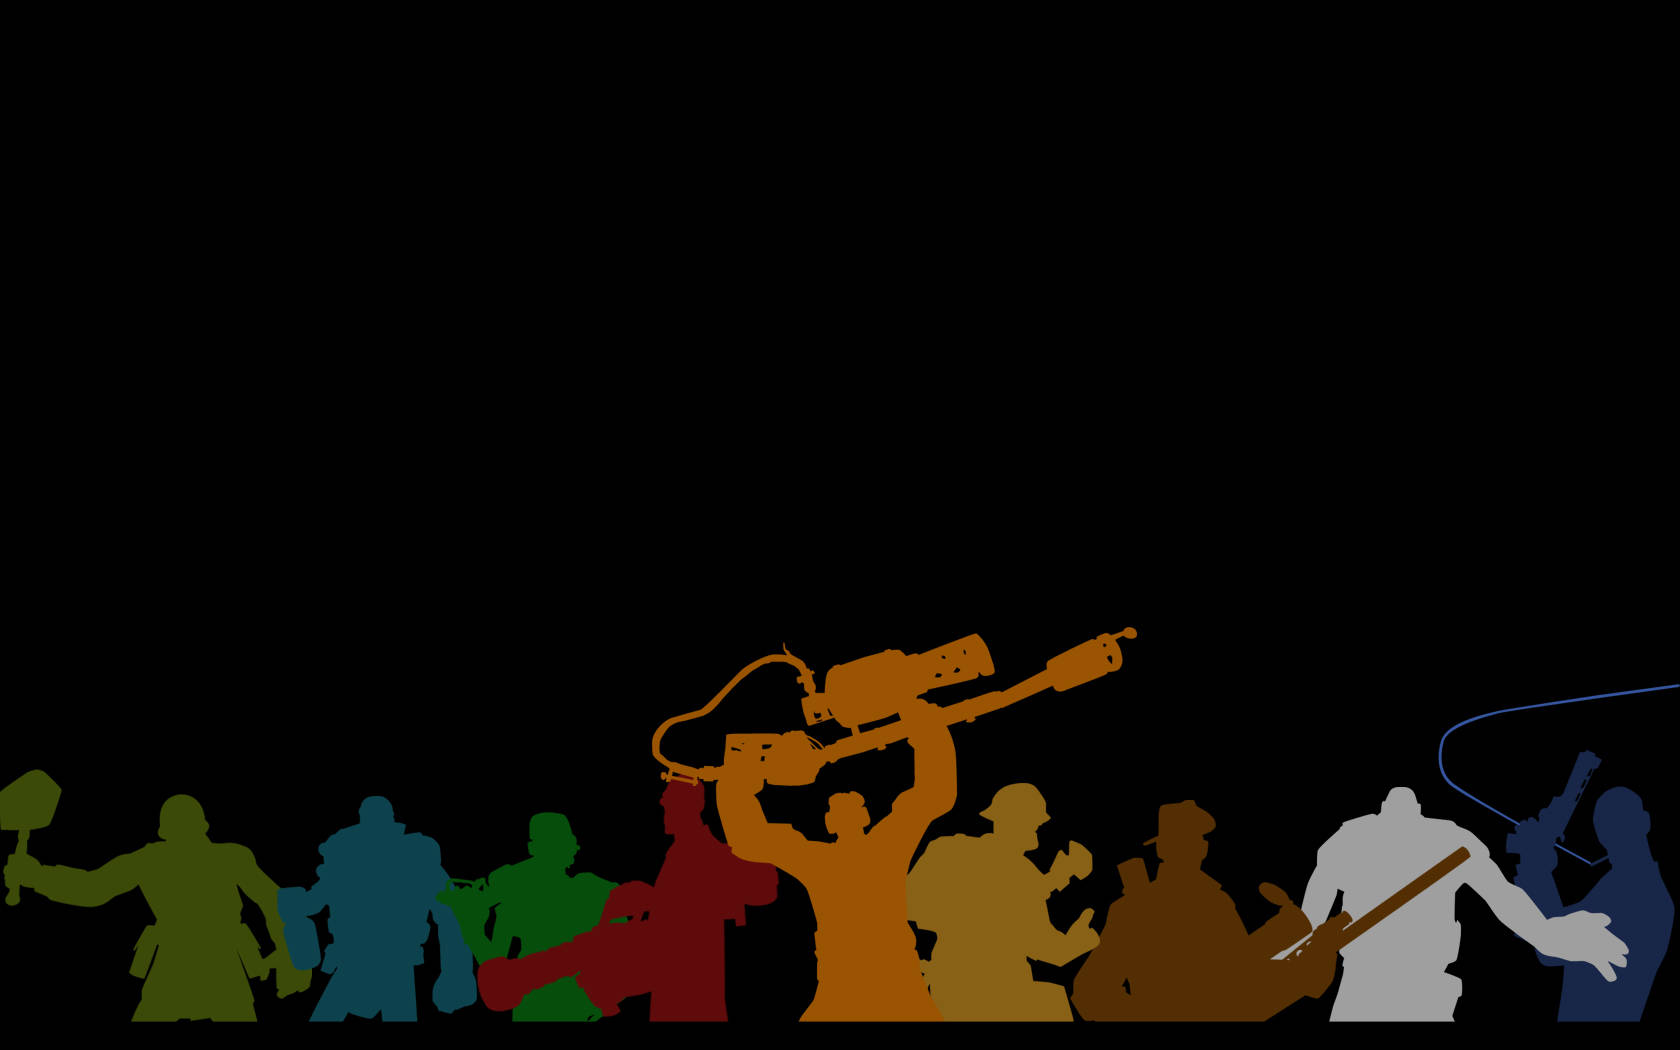 Team Fortress 2 Colored Classes Silhouettes Wallpaper